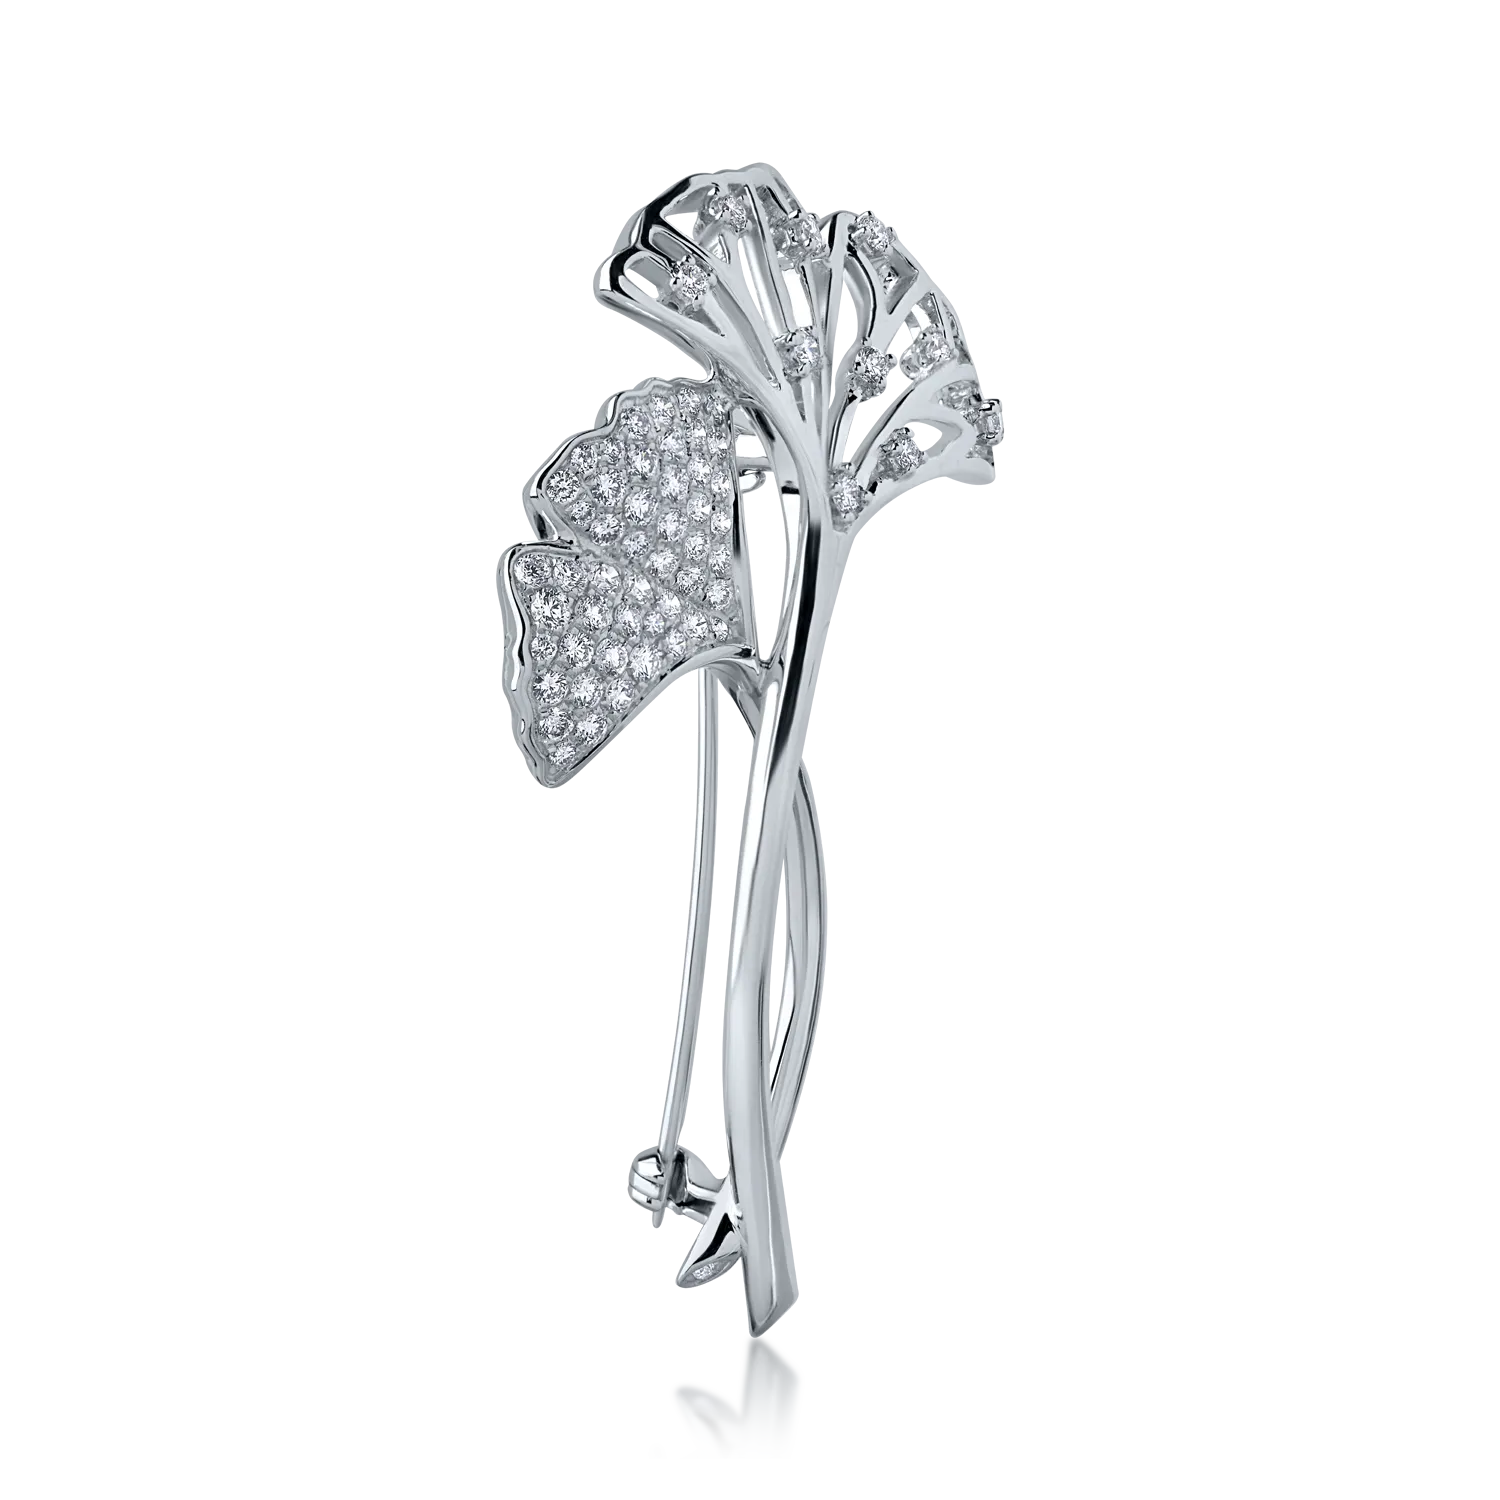 18K white gold brooch with 0.86ct diamonds